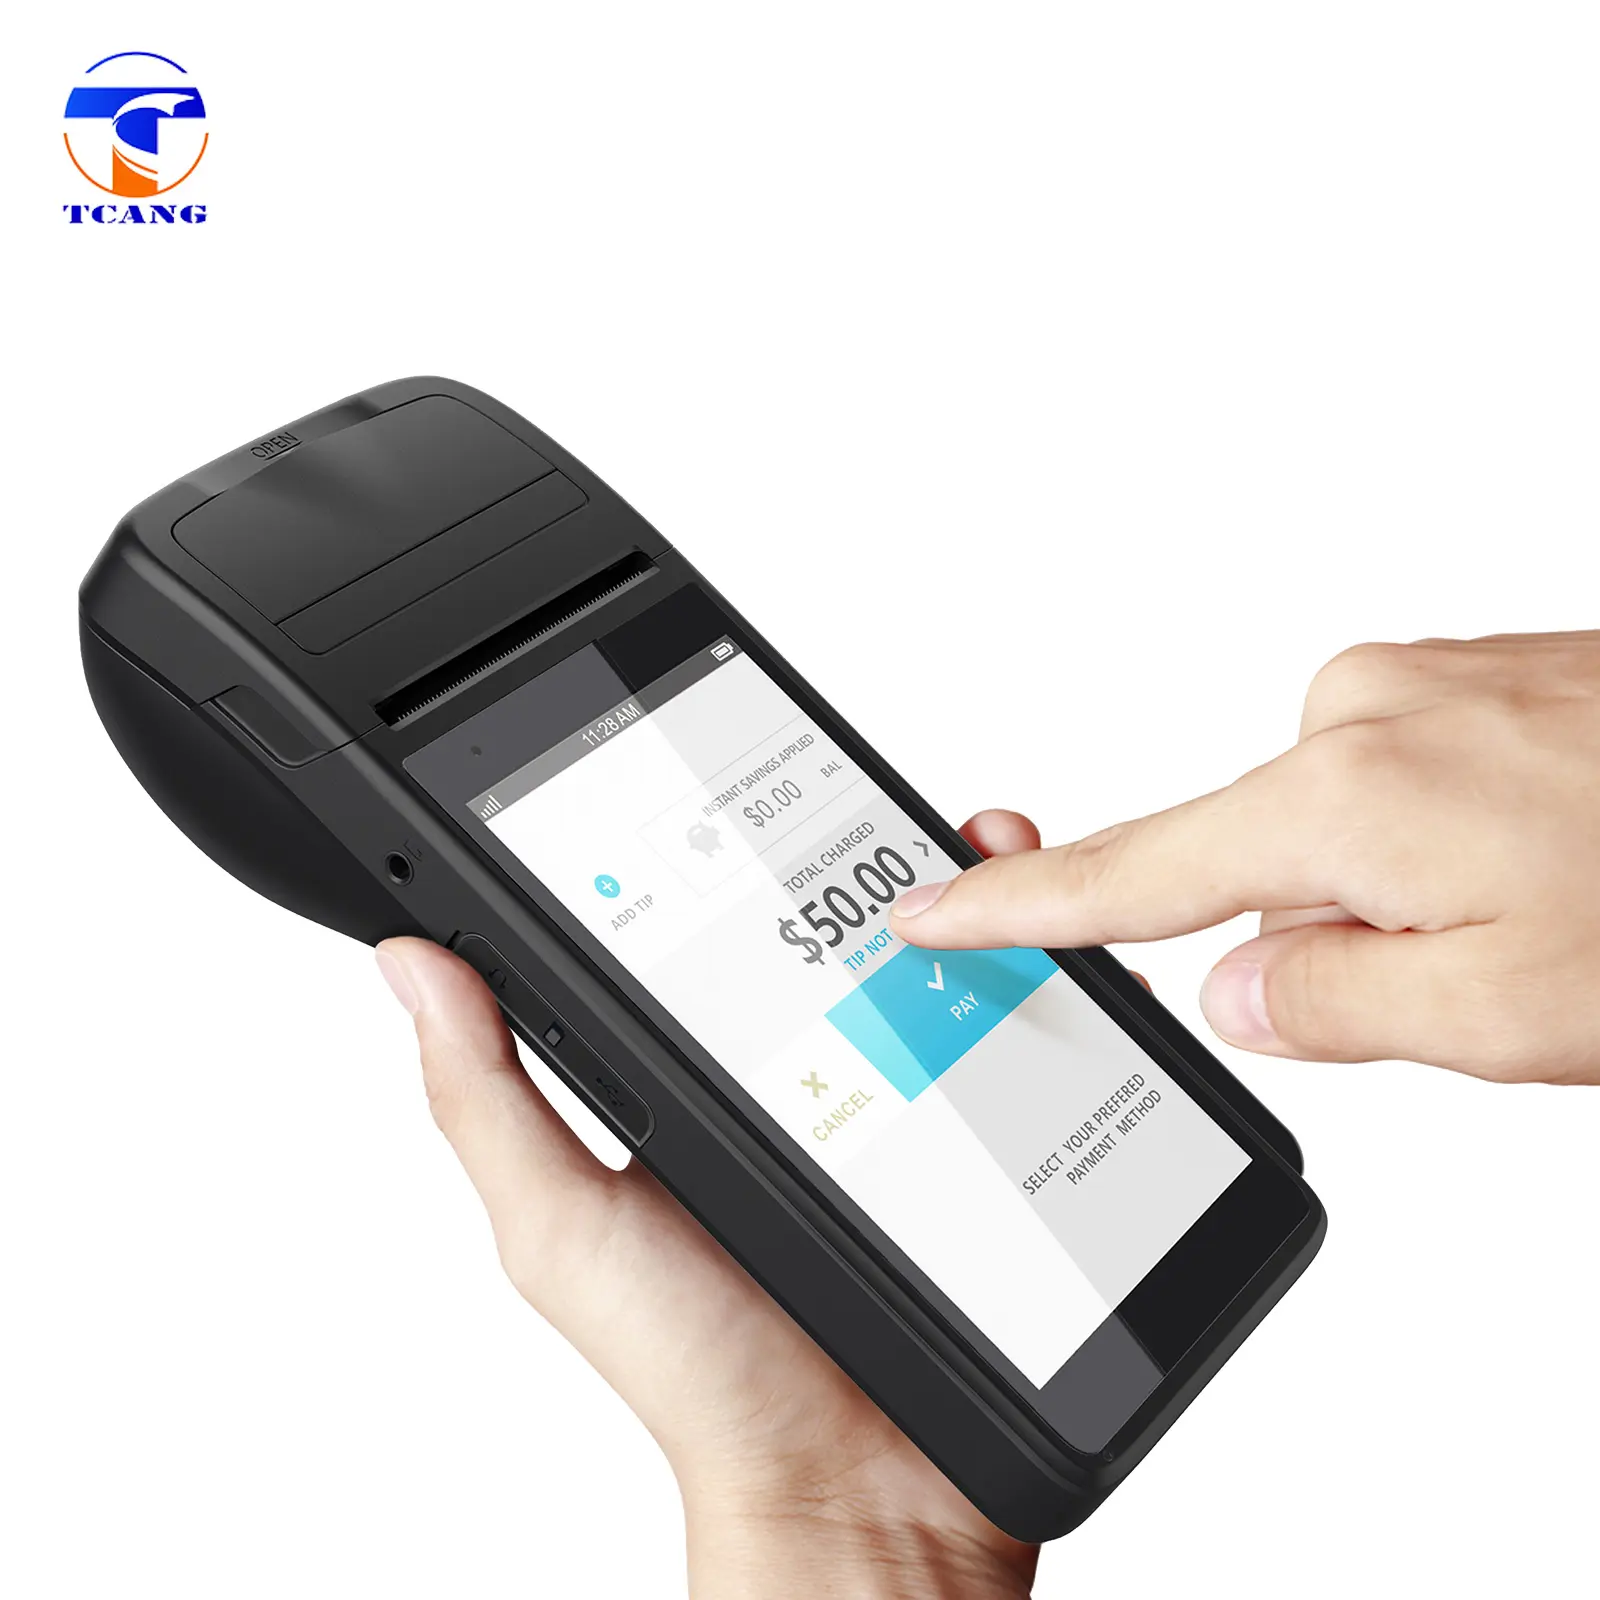 Bus ticket banking transactions easy WIFI NFC eft ce e wallet handheld edc payment pos terminal system